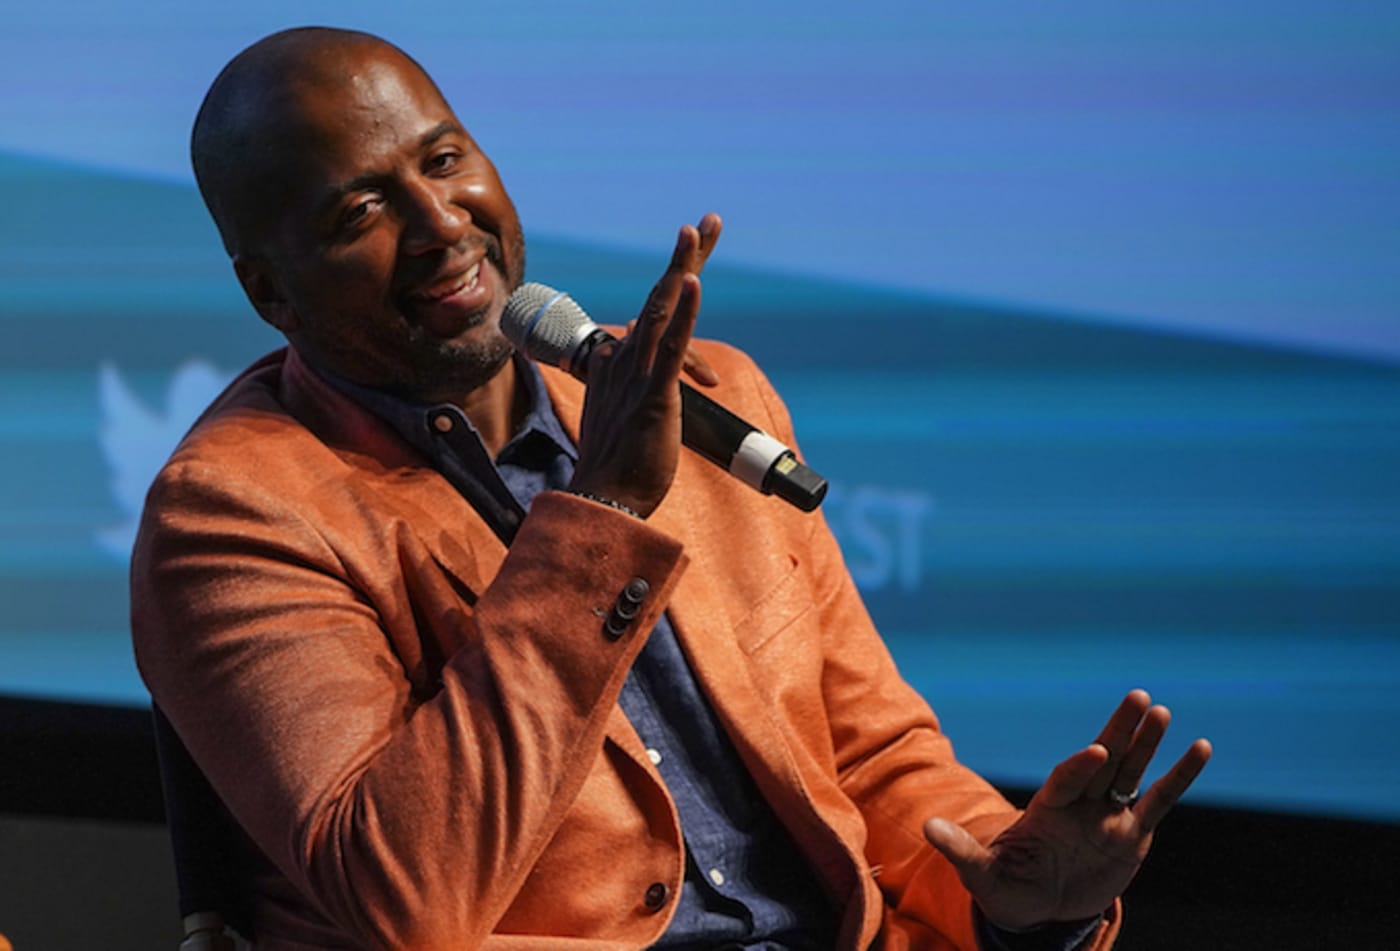 Malcolm D. Lee Replaces Terence Nance as Director for 'Space Jam 2' |  Complex